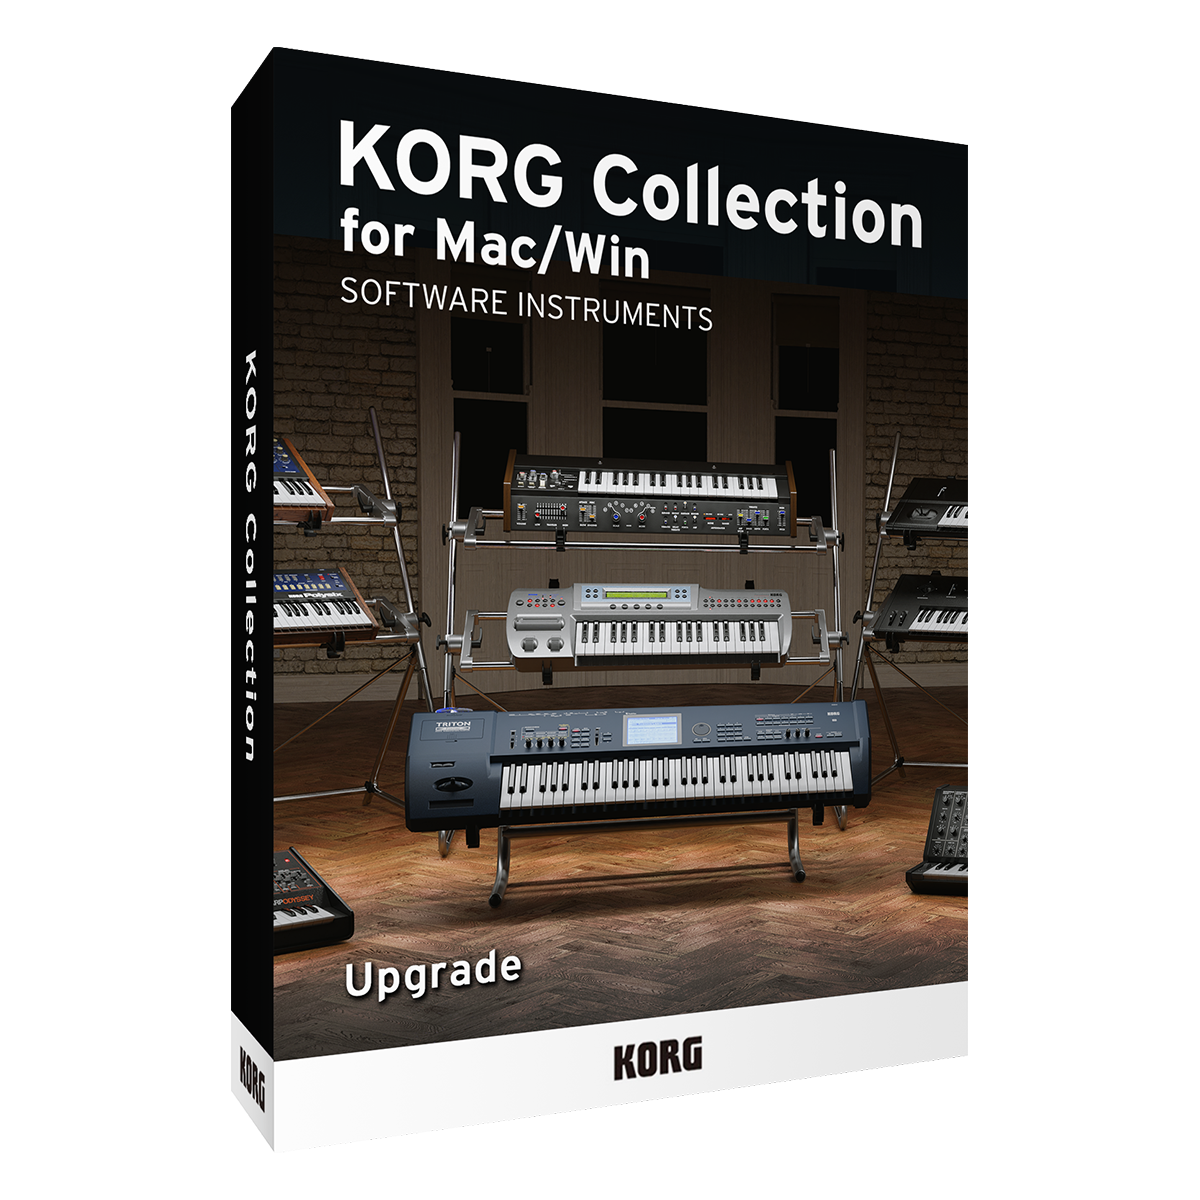 Korg collection. Korg Synthesizers (Legacy collection). Korg - Legacy collection 1. Korg Legacy collection 2022. Korg Legacy collection 3.